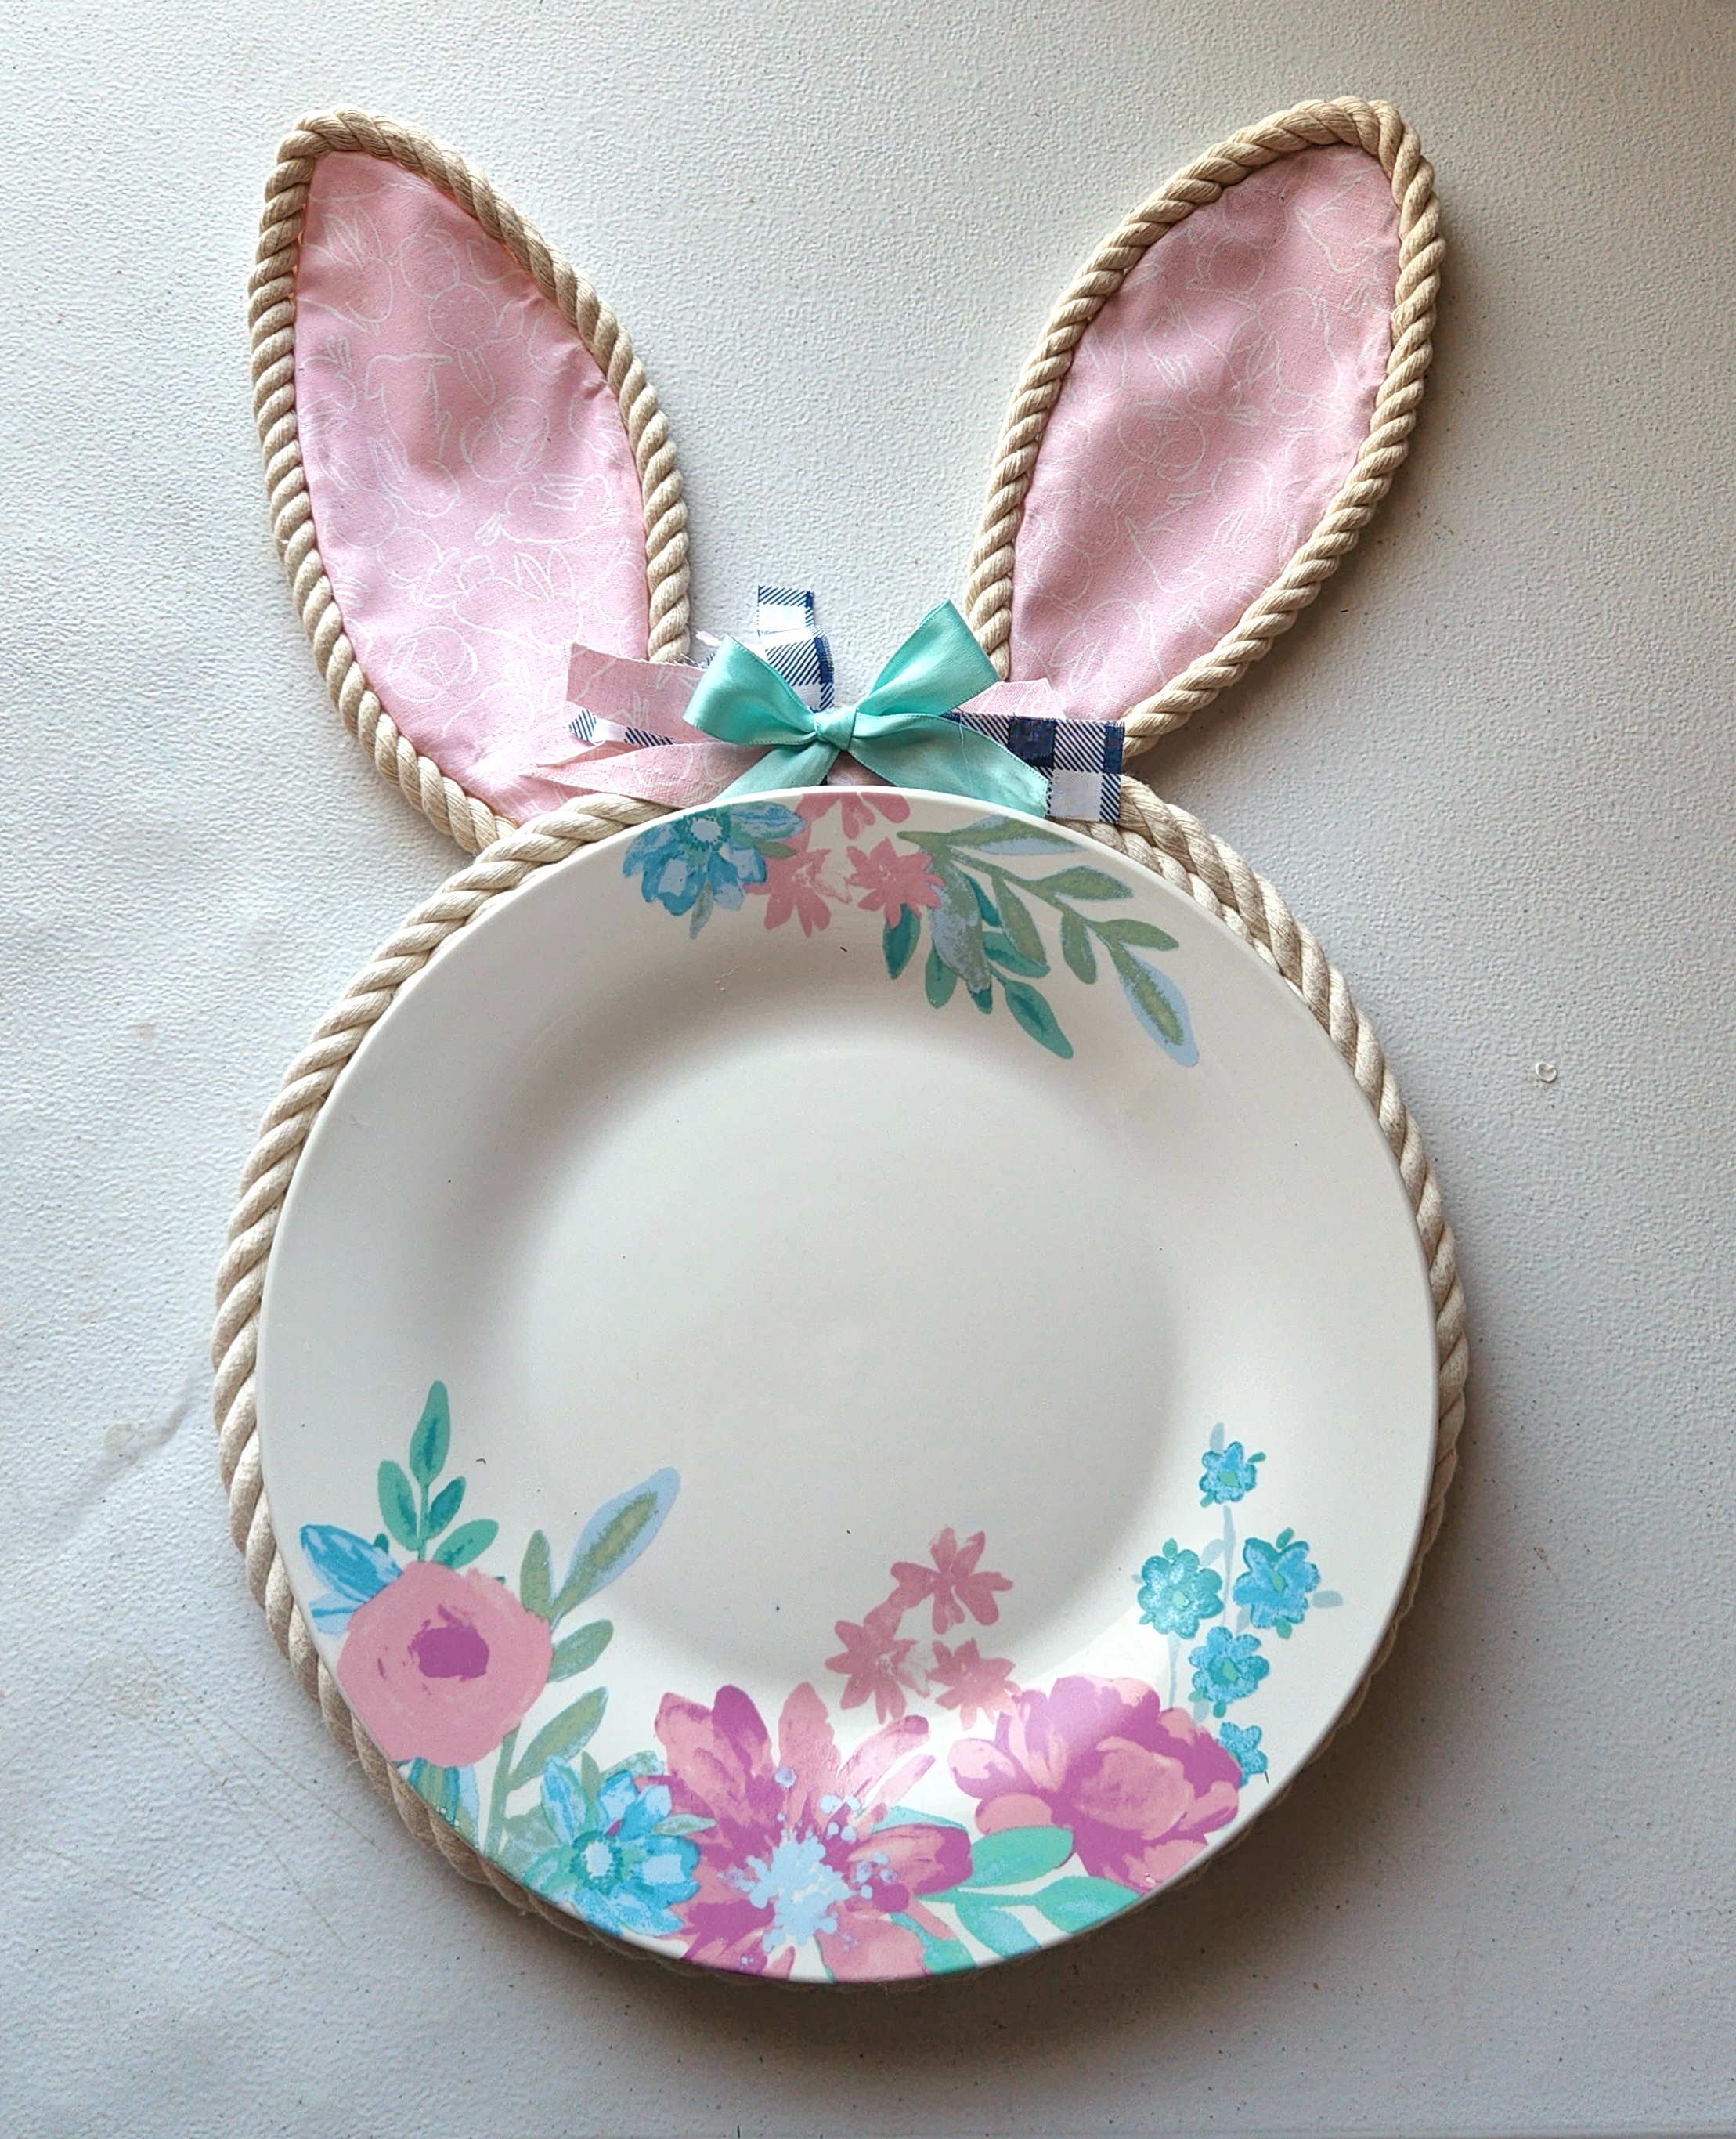 Rope bunny placemat completed.